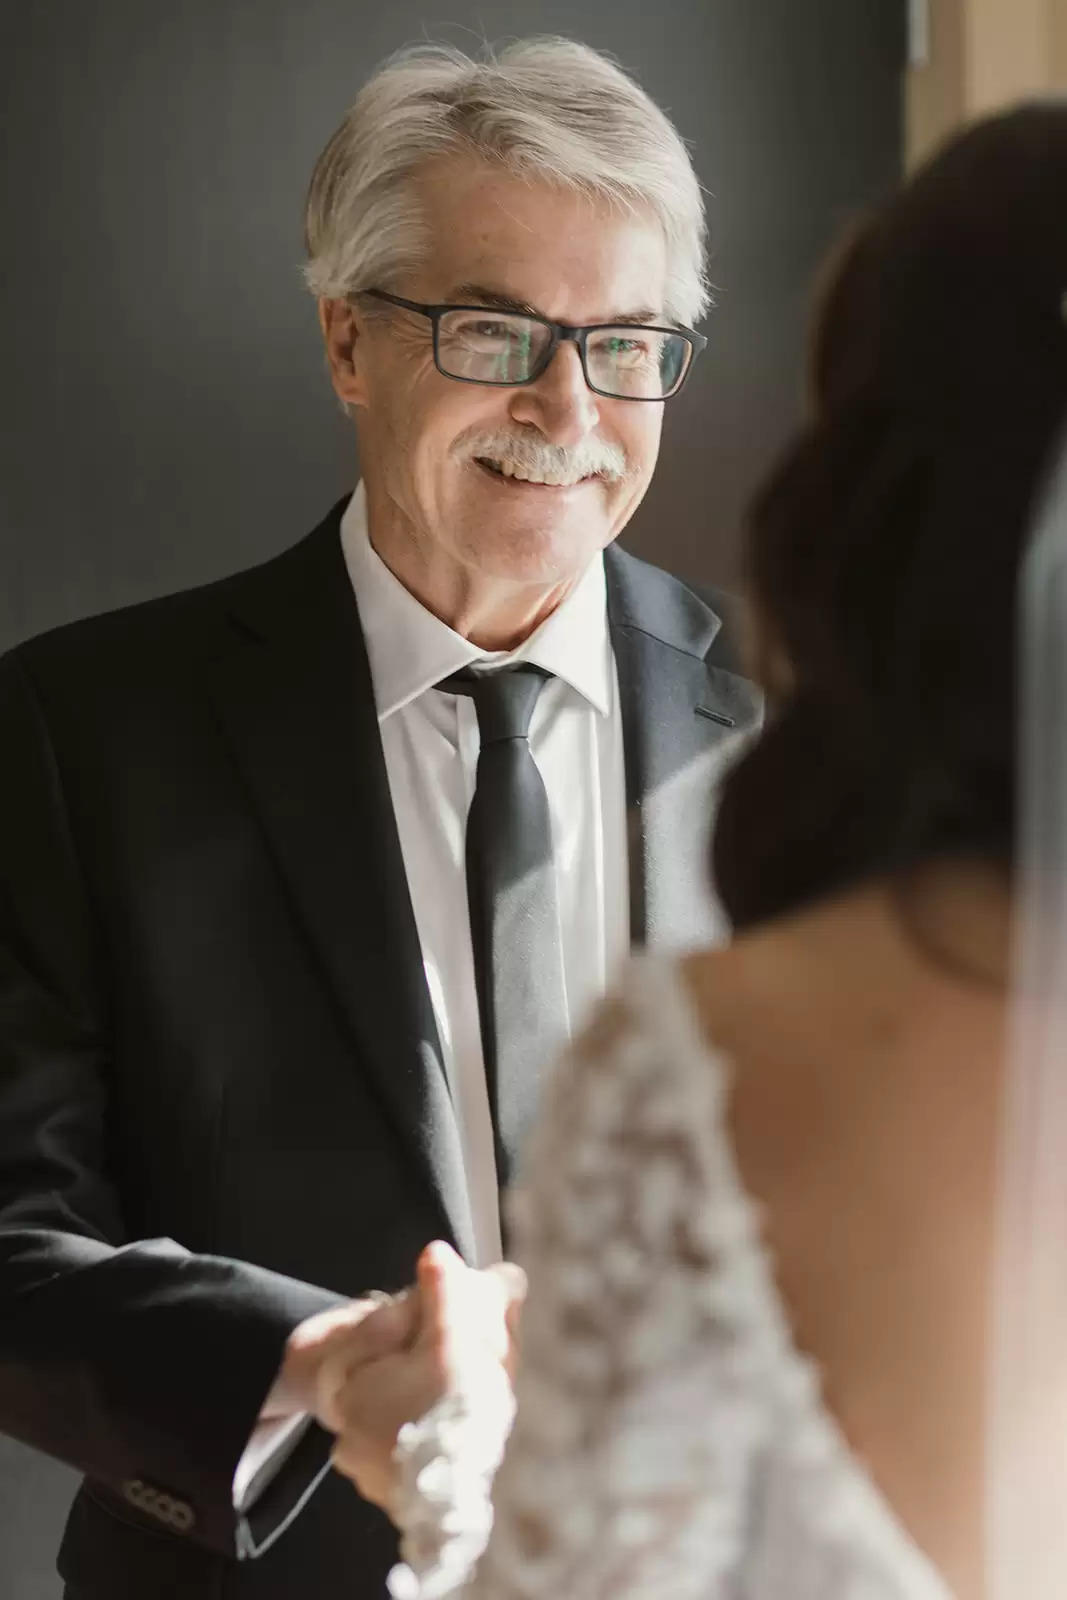 The First Look With Your Dad on Your Marriage ceremony Day